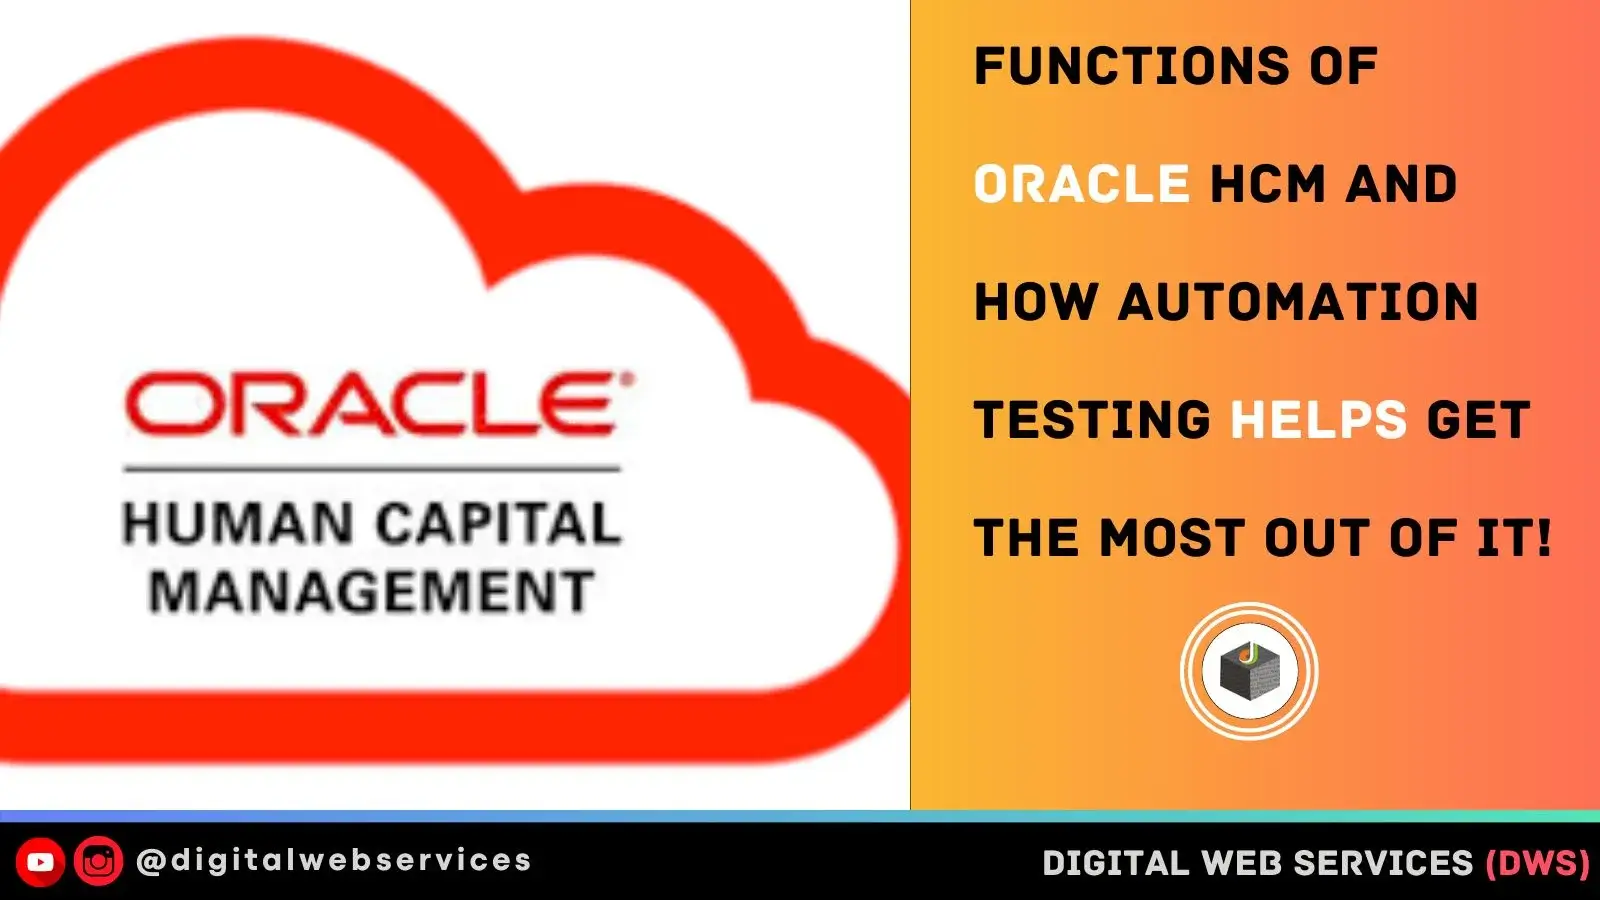 Functions of Oracle HCM and How Automation Testing Helps Get the Most Out of It!